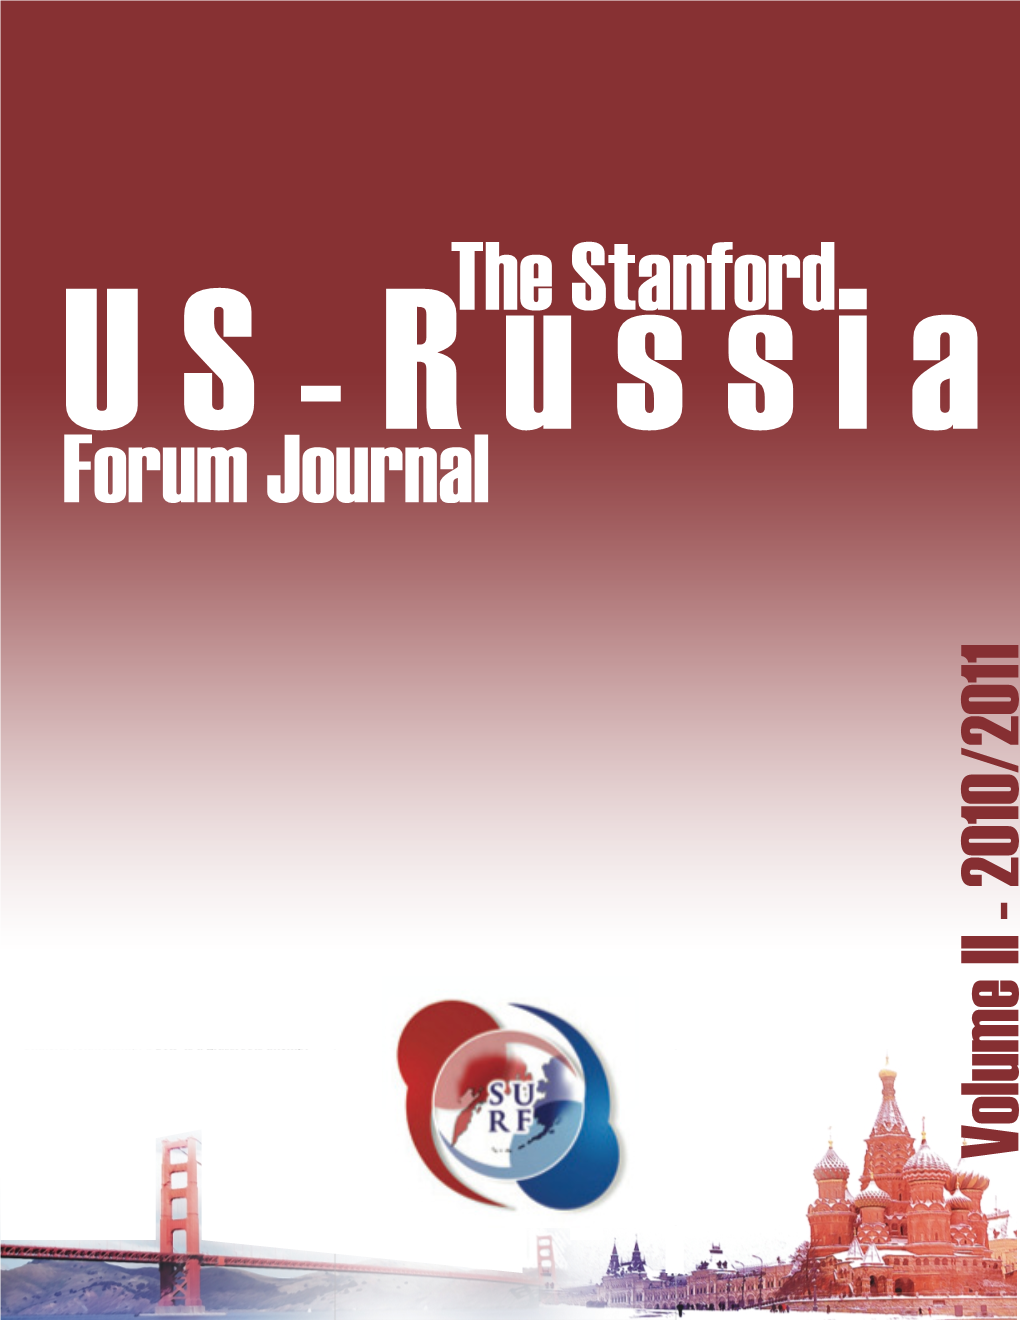 The Stanford Forum Journal